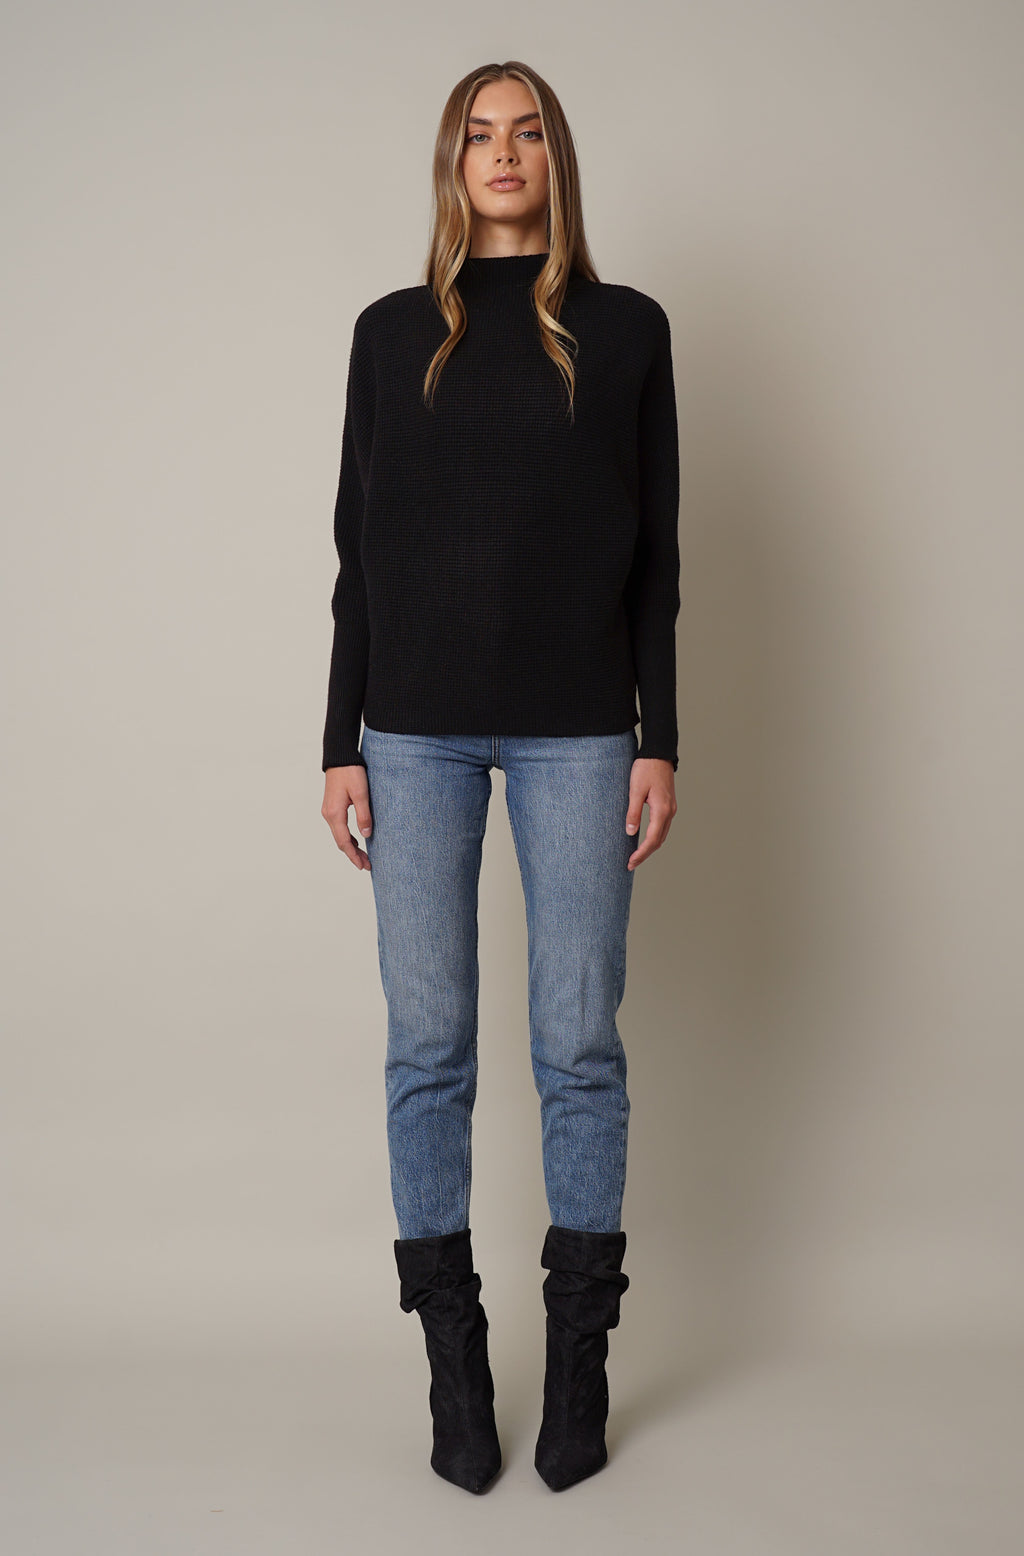 Directional Ribbed Funnel Neck – Eclipse